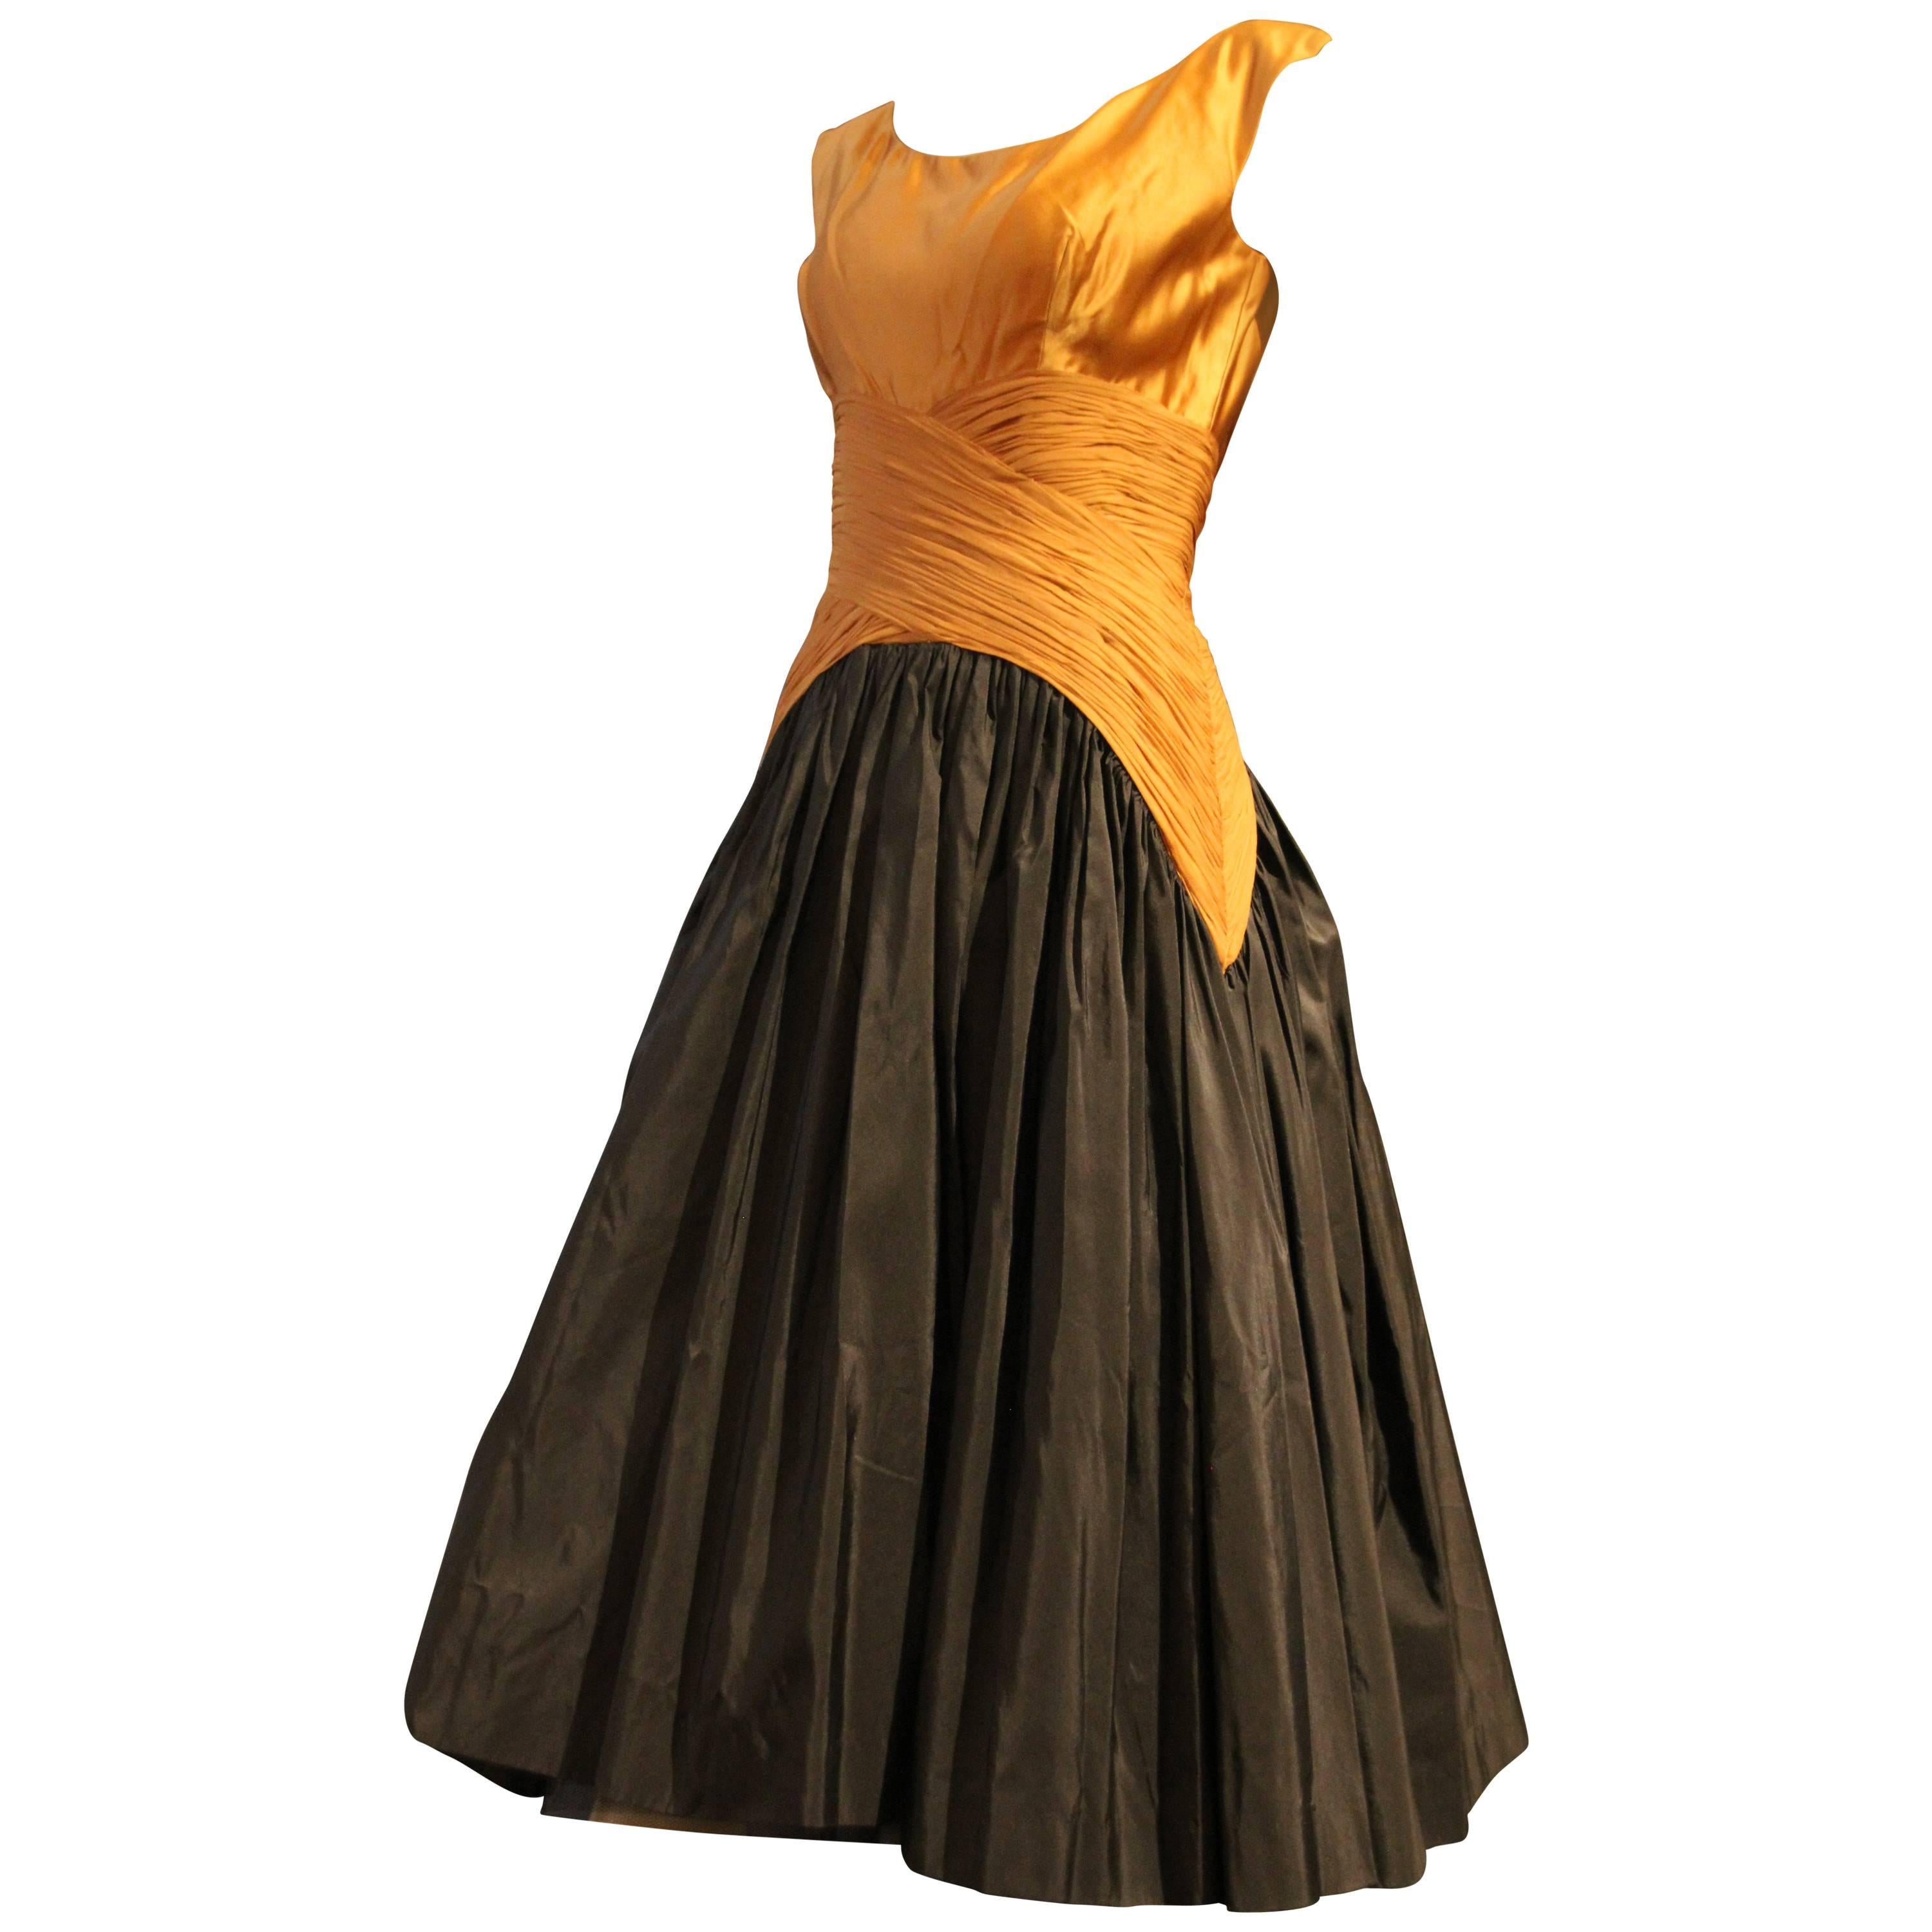 1950s Samuel Winston Black and Gold Cocktail Dress w Exquisite Bodice Detailing For Sale